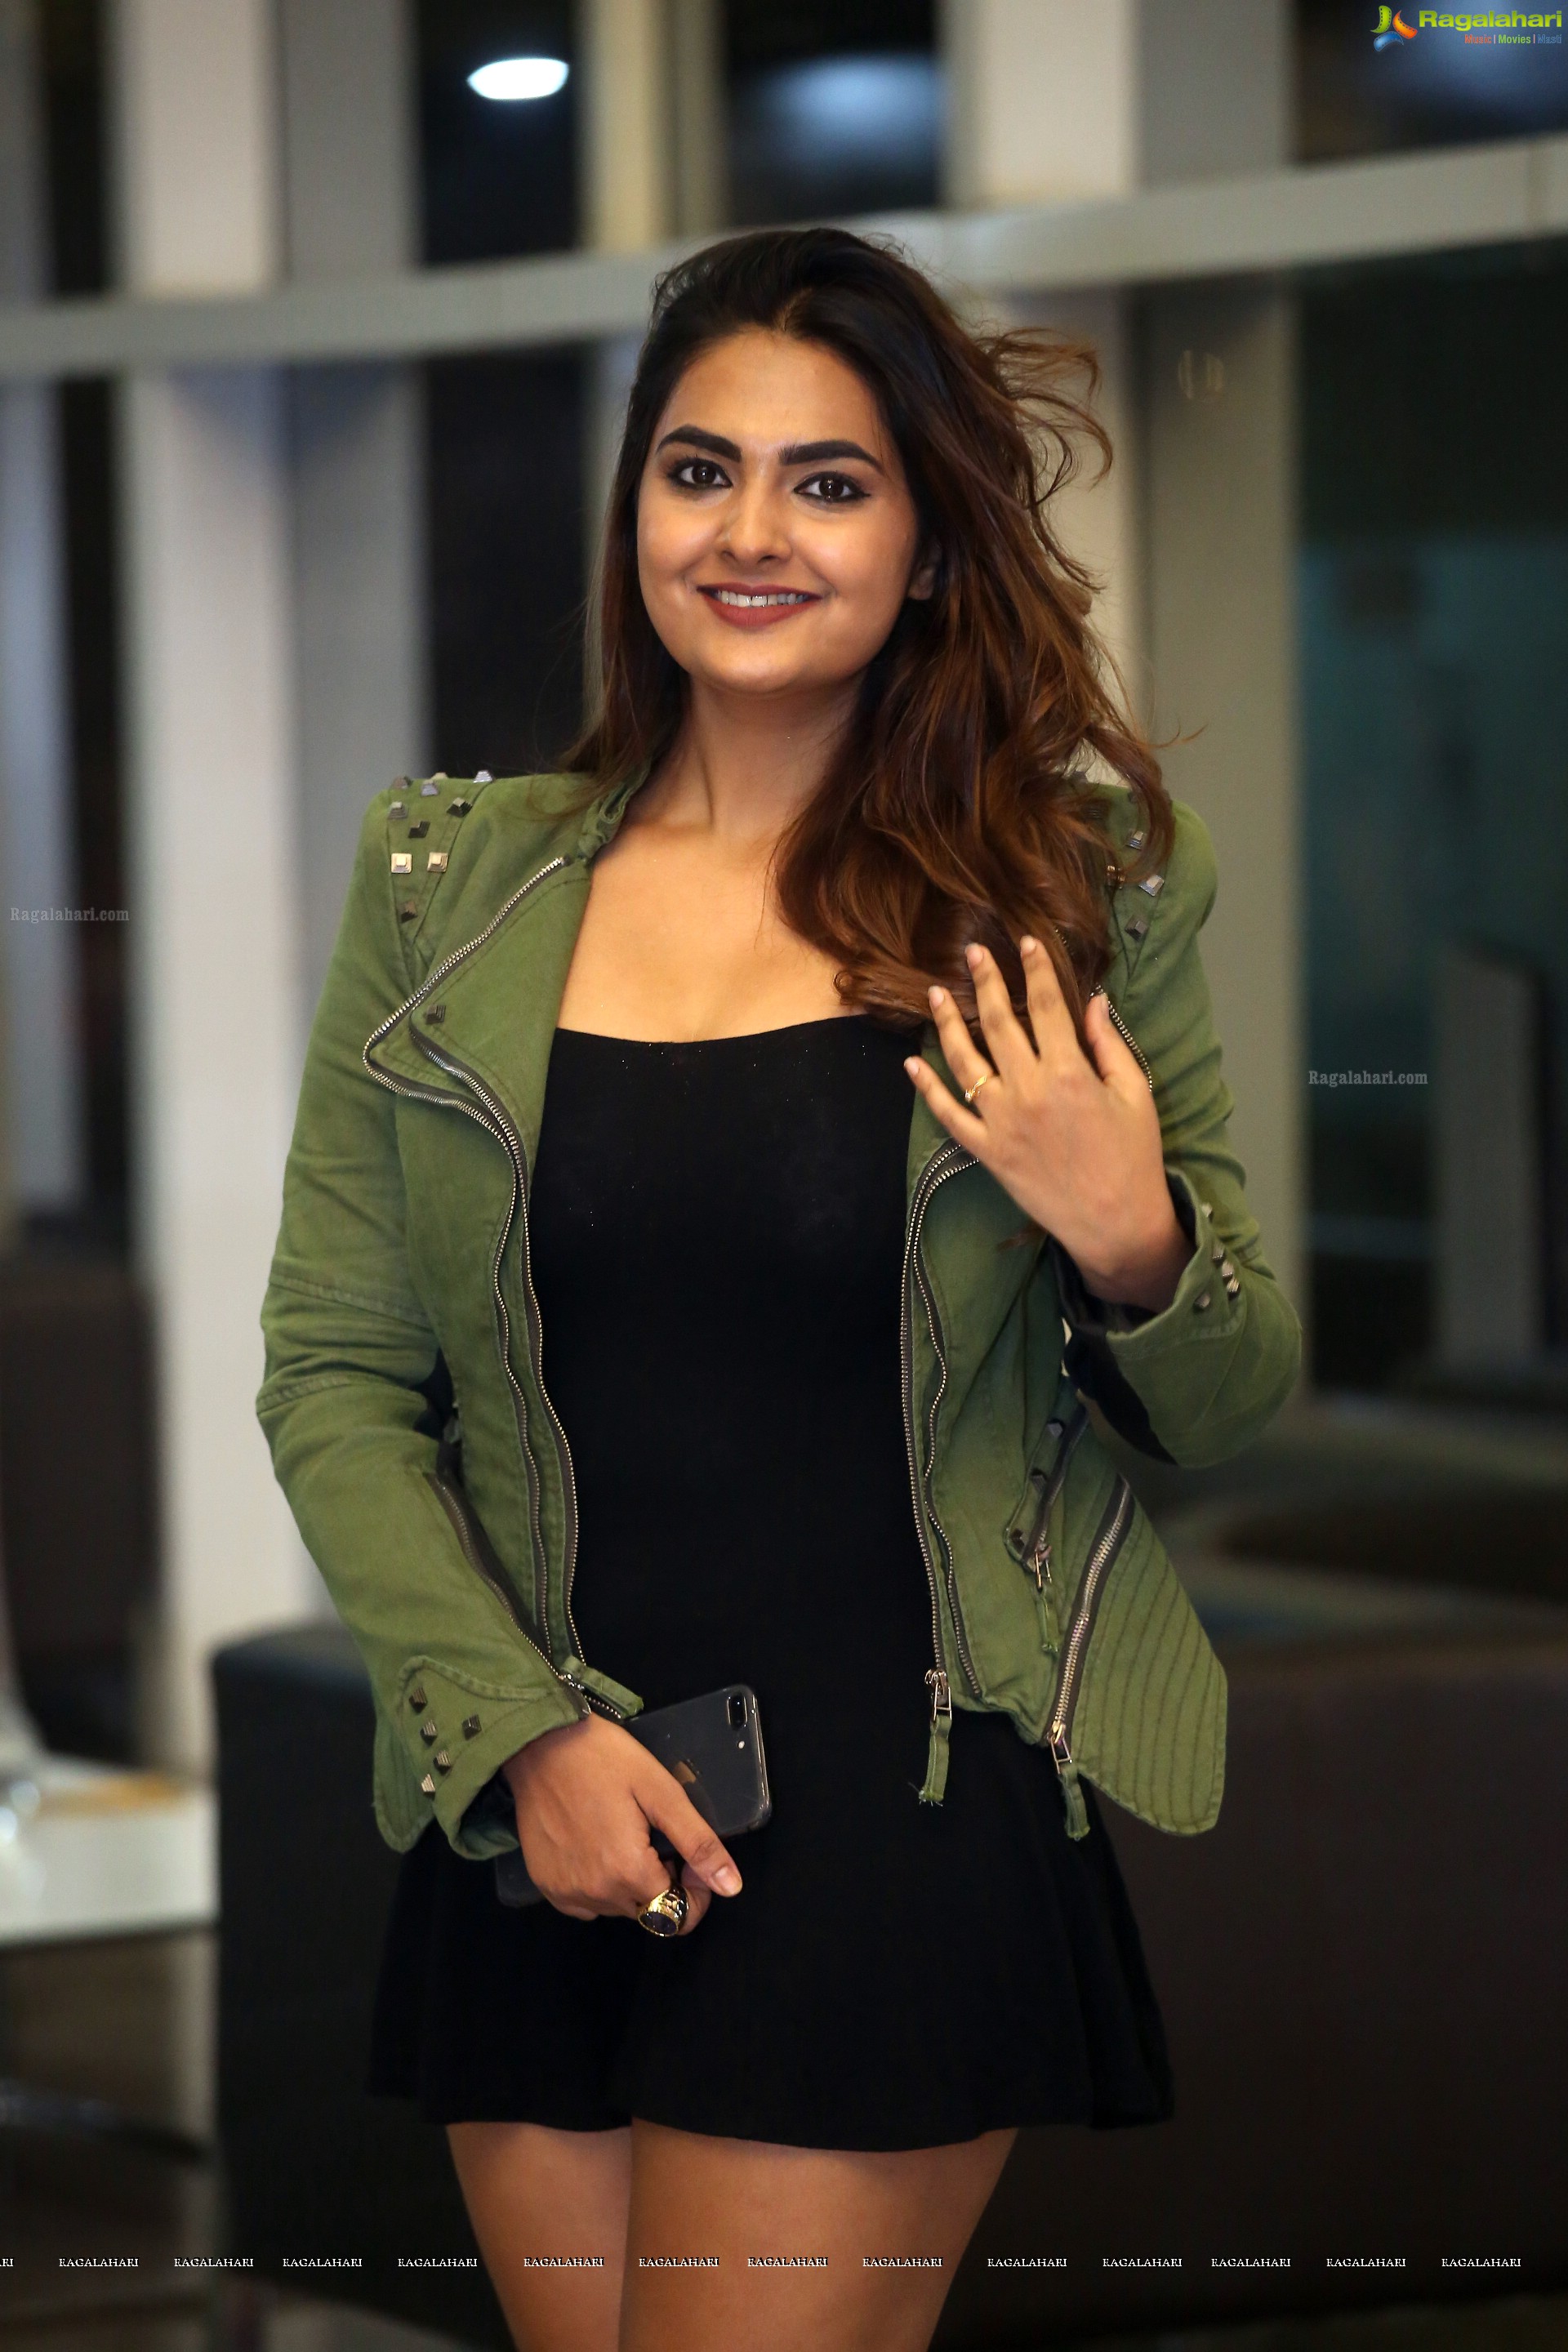 Neha Deshpande @ BeautyLand at JRC Convention Centre - HD Gallery